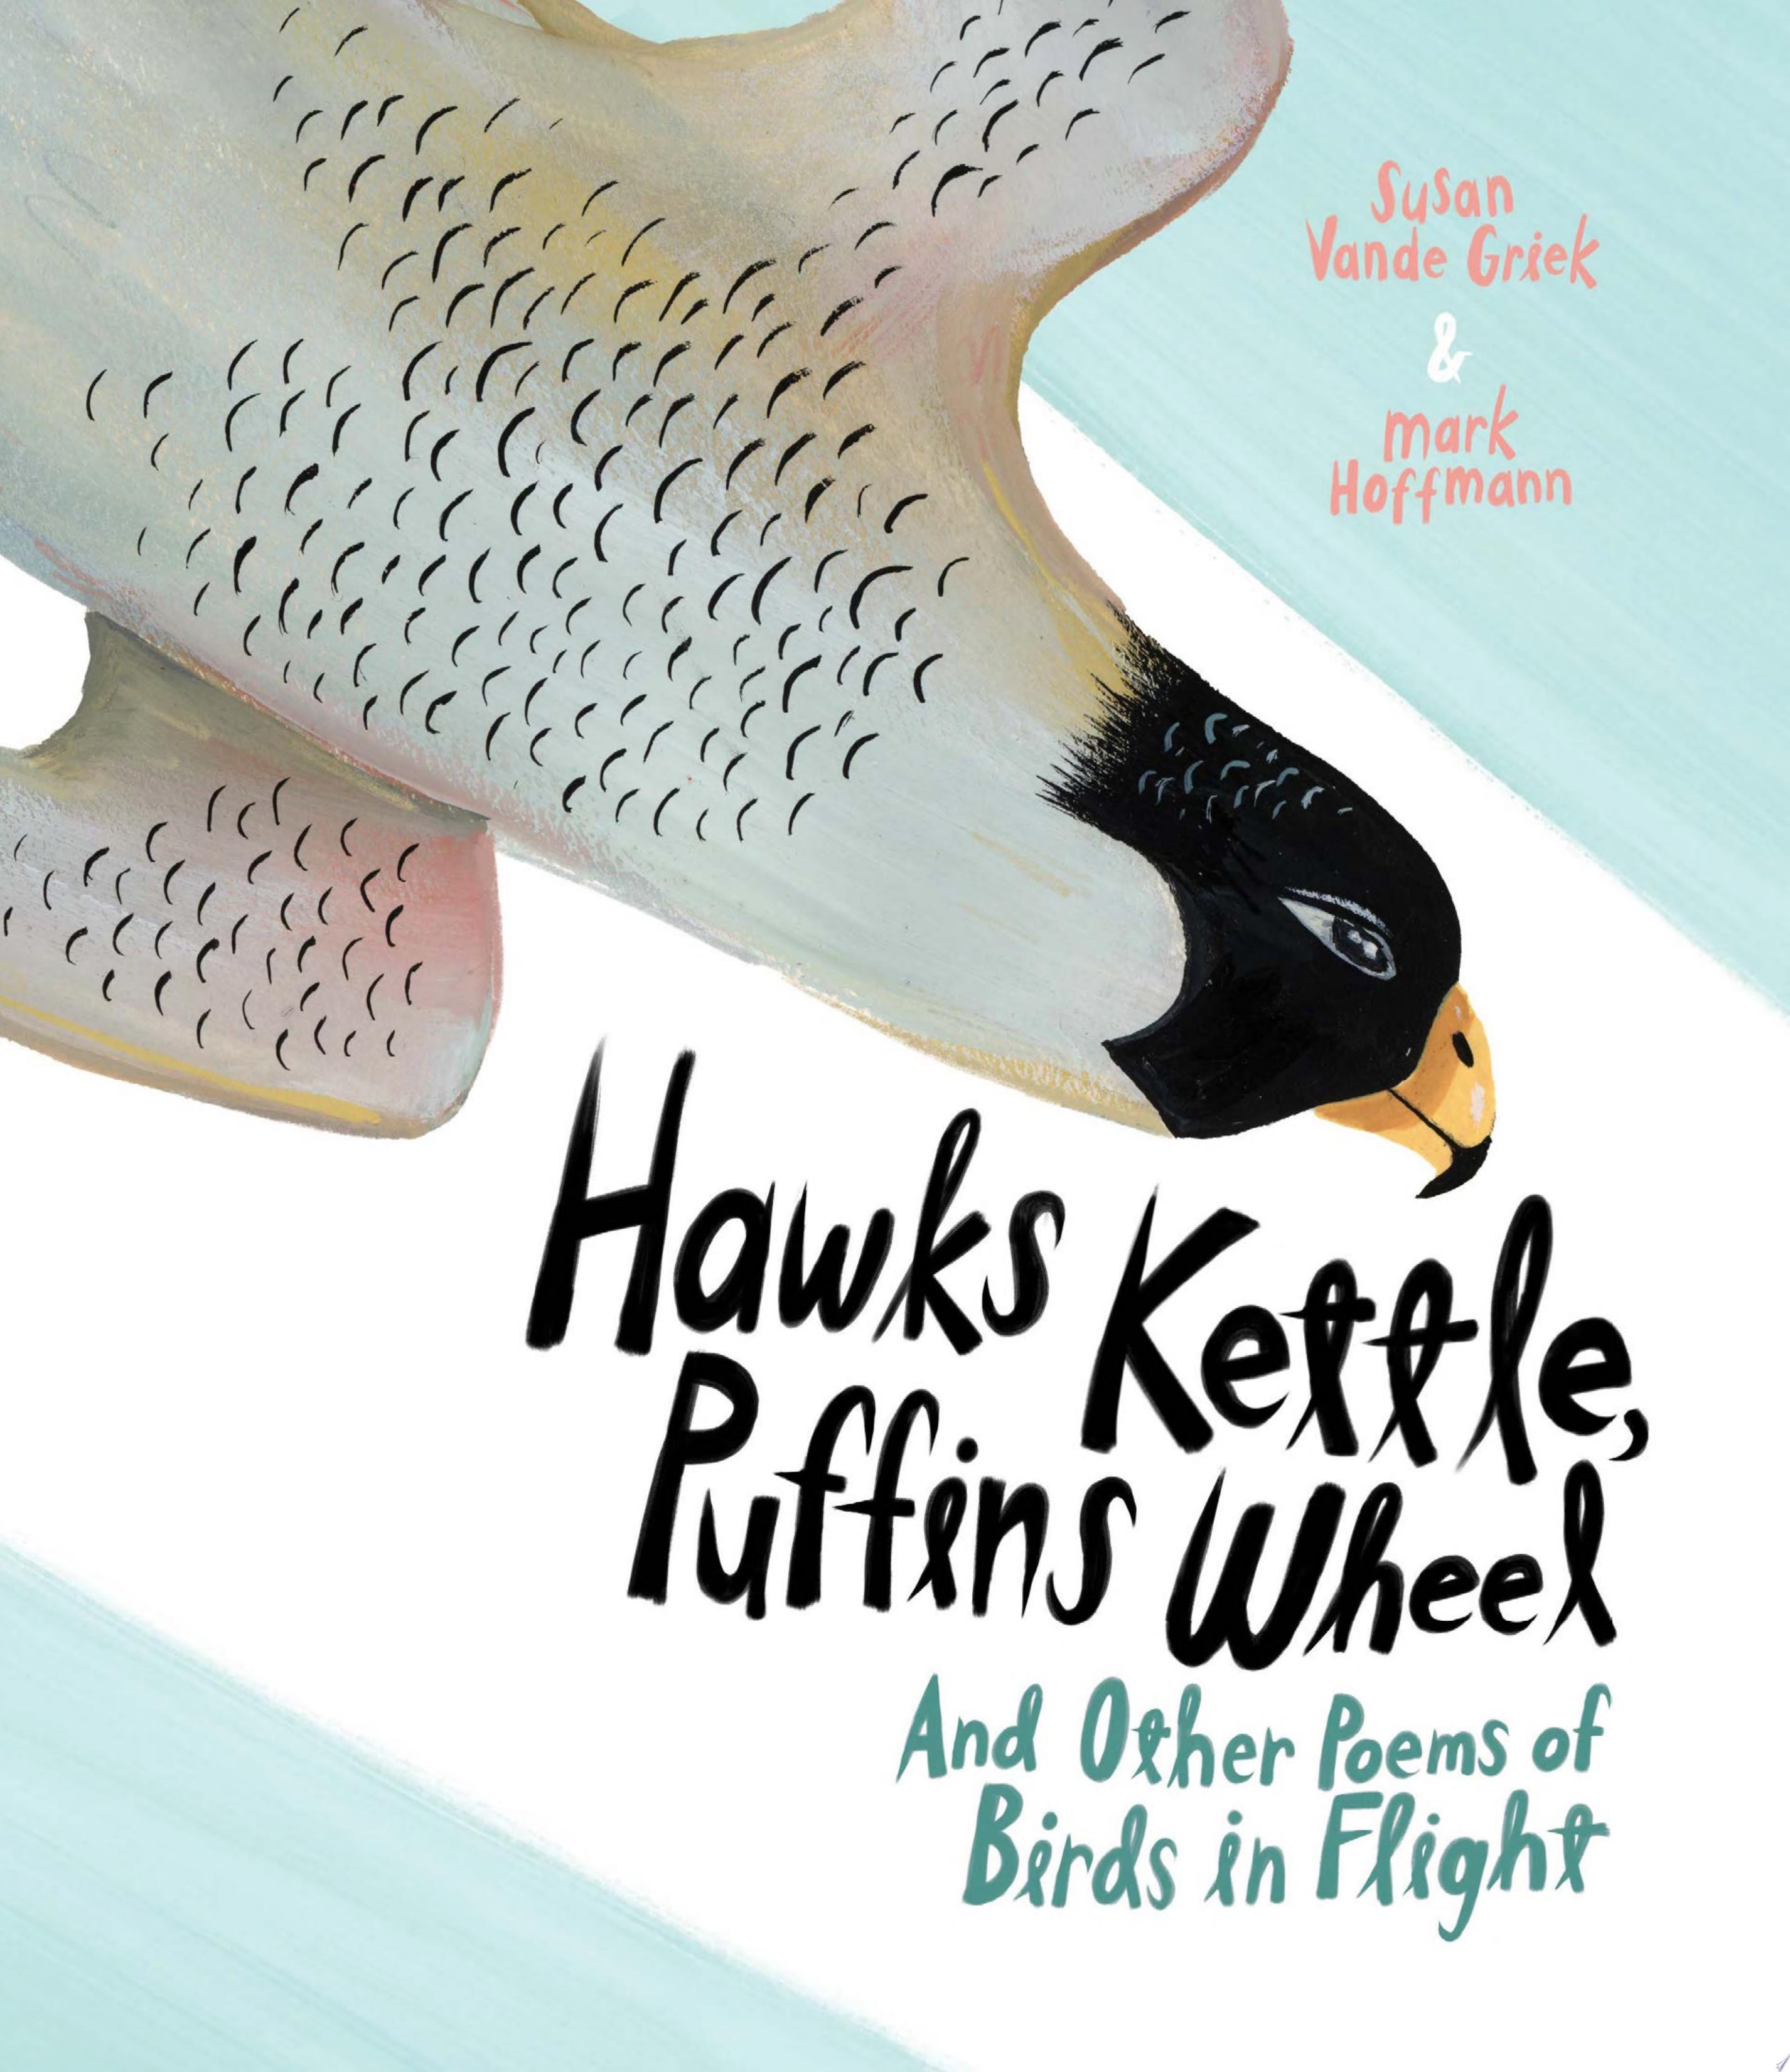 Image for "Hawks Kettle, Puffins Wheel"